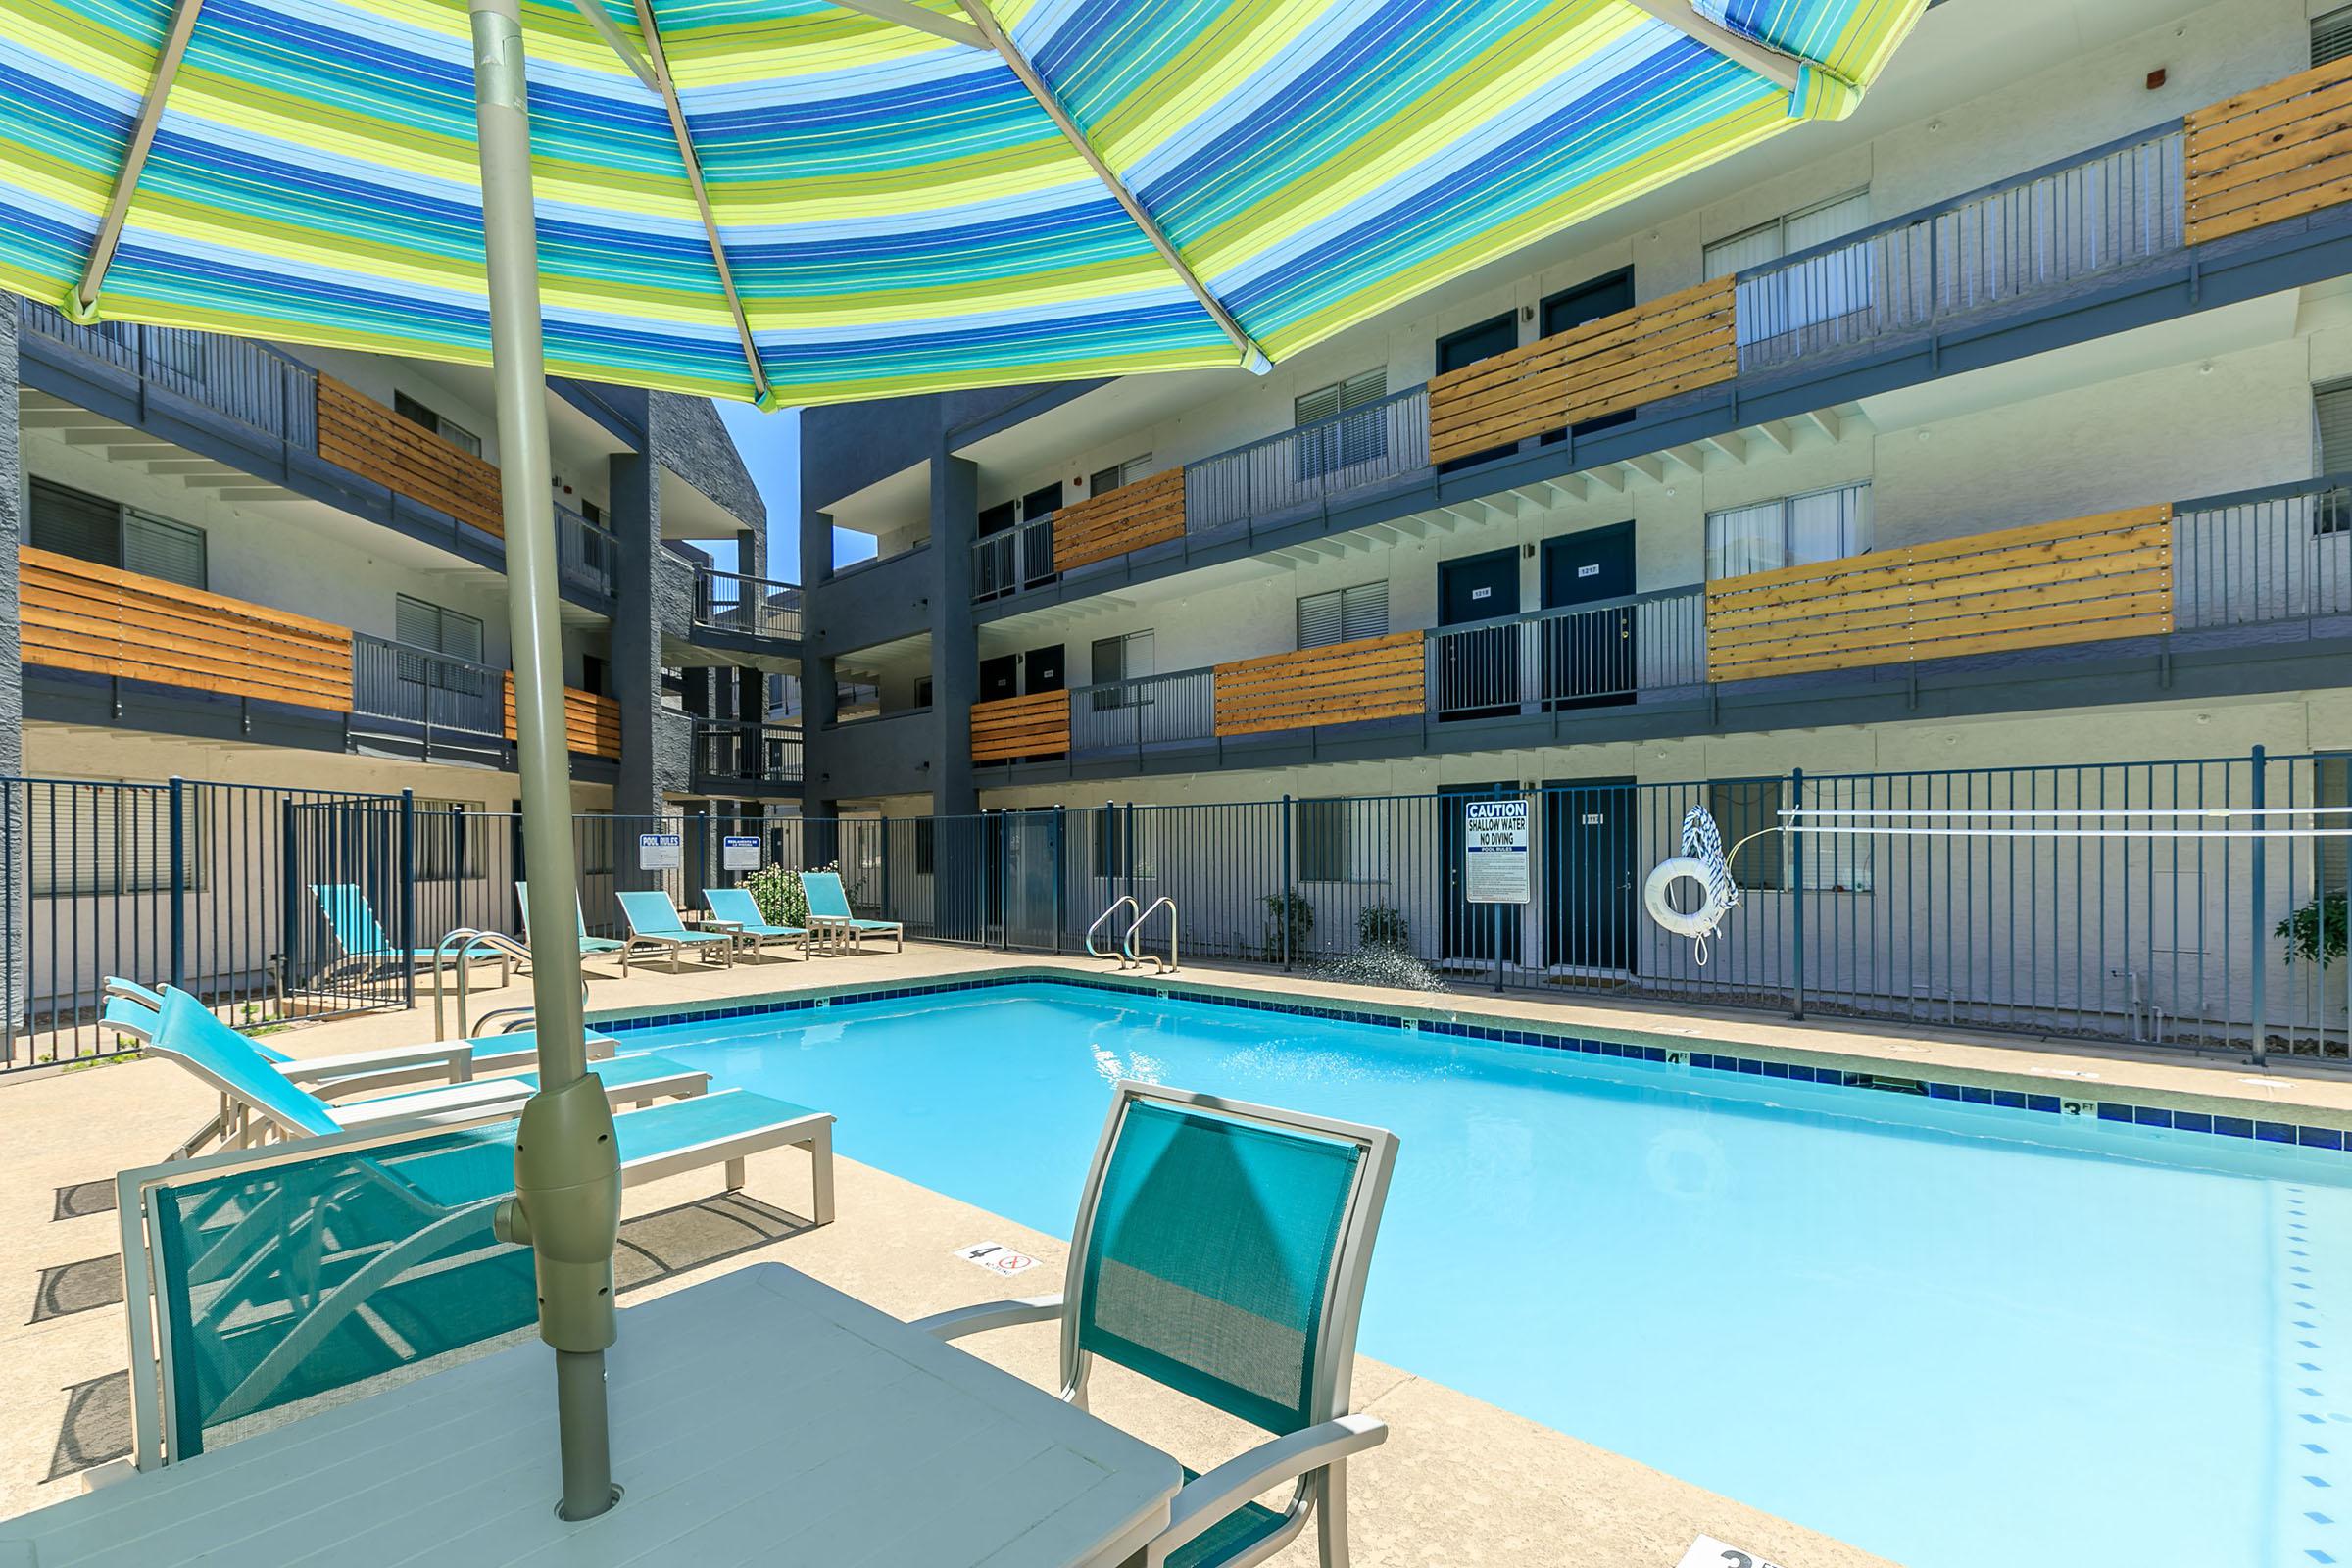 Resort style outdoor pool under a 3 story apartment building